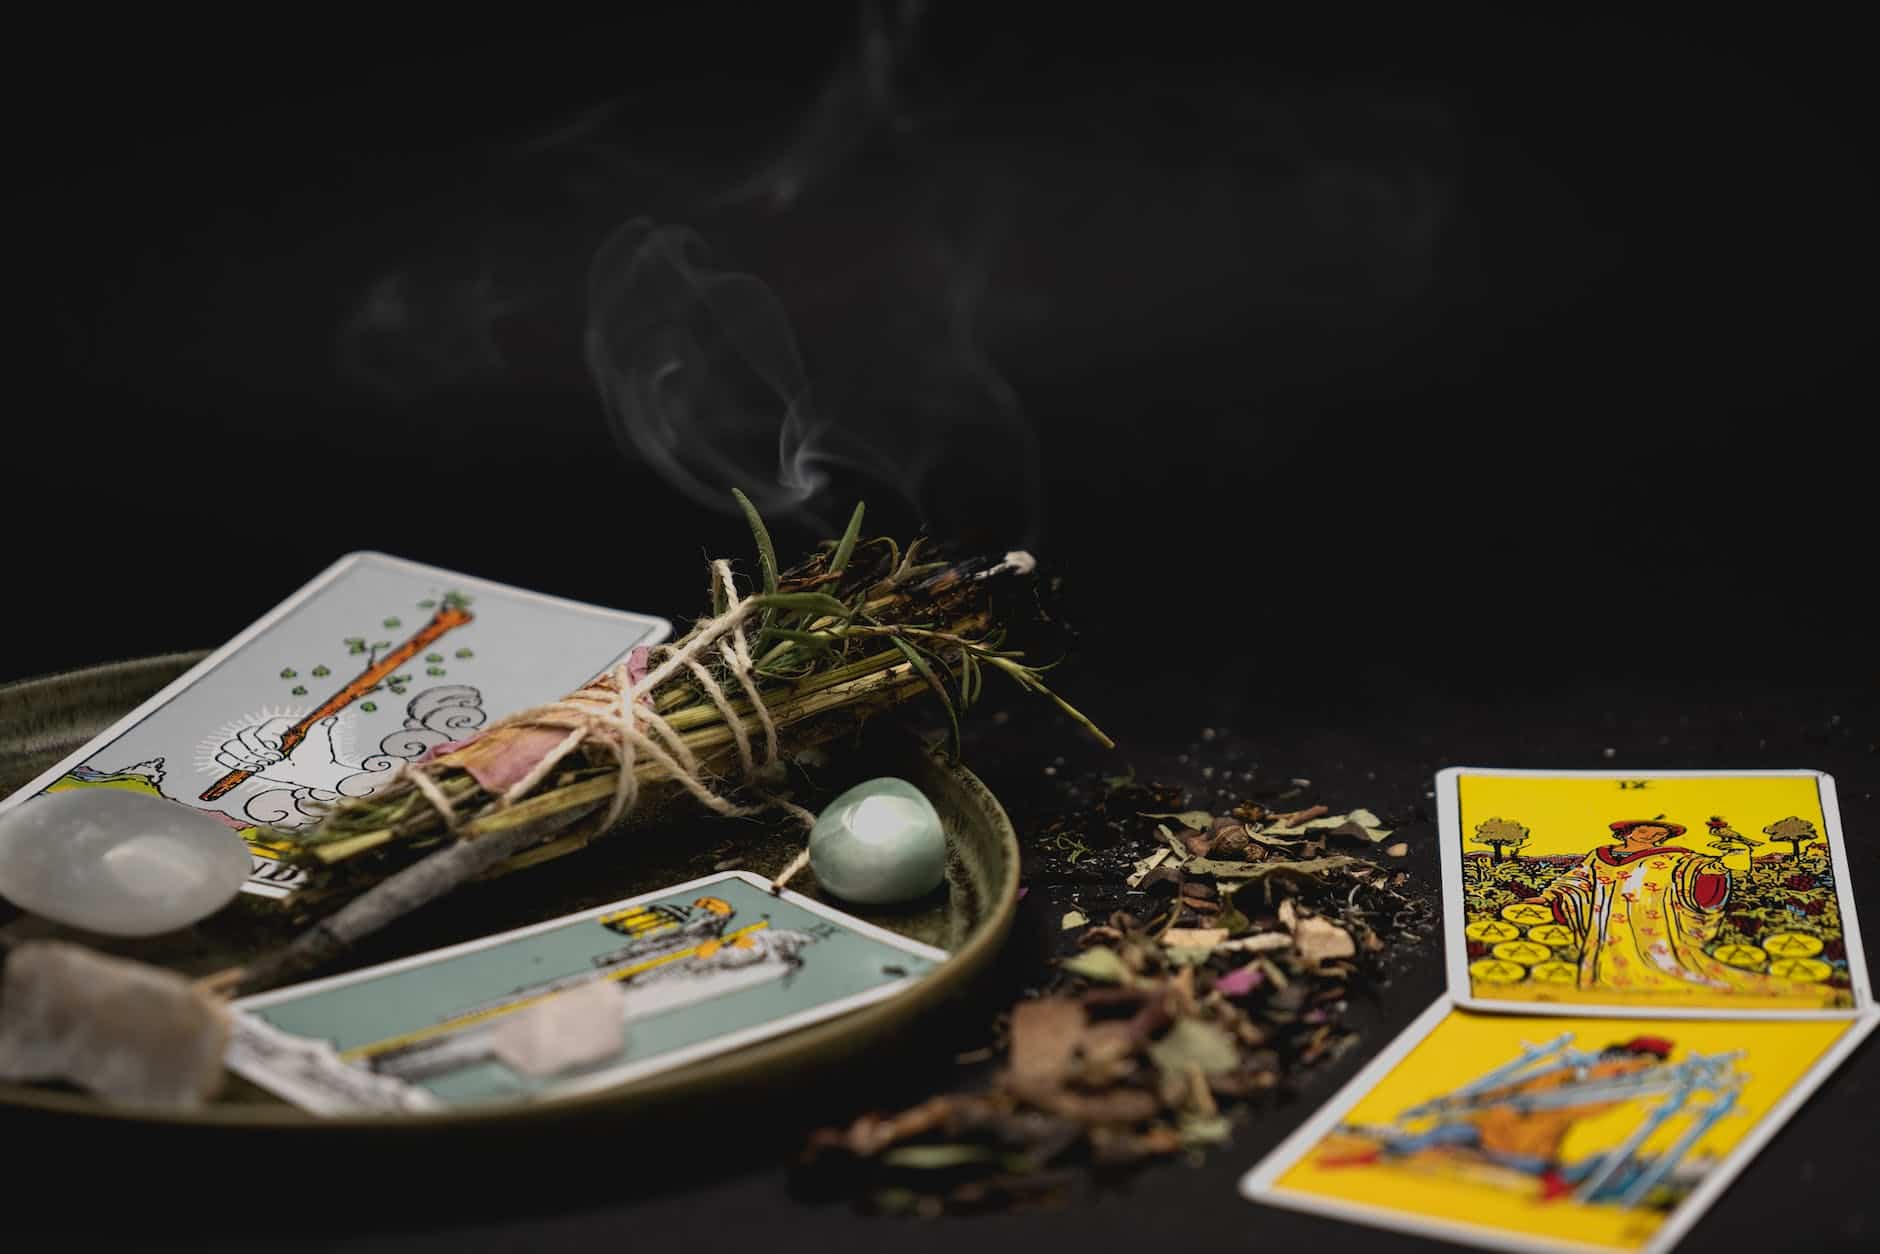 tarot cards near burning plants in close up photography